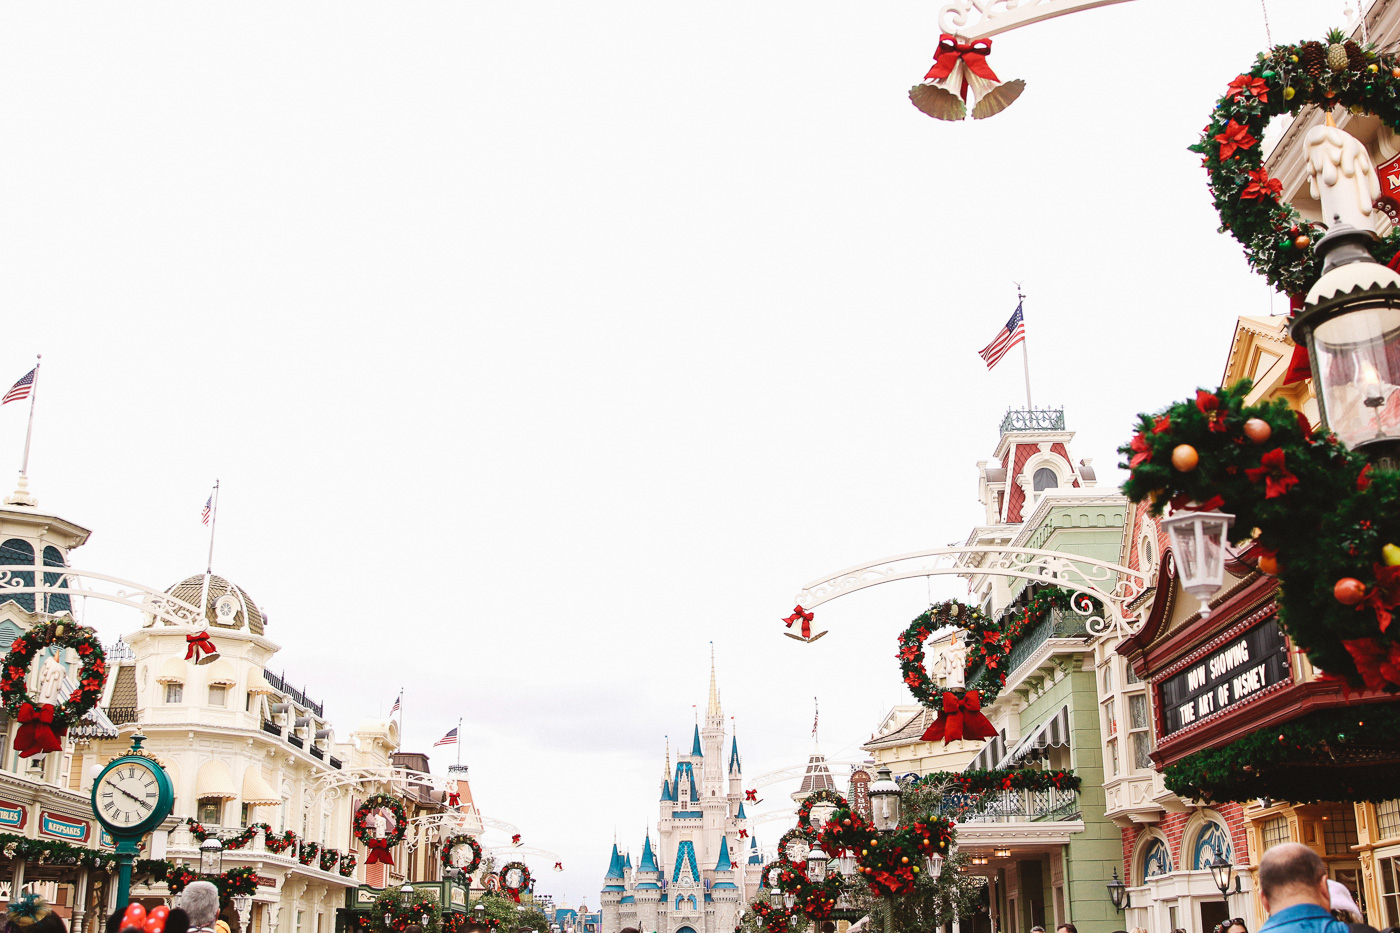 guide to Disney World, tips and tricks for your vacation